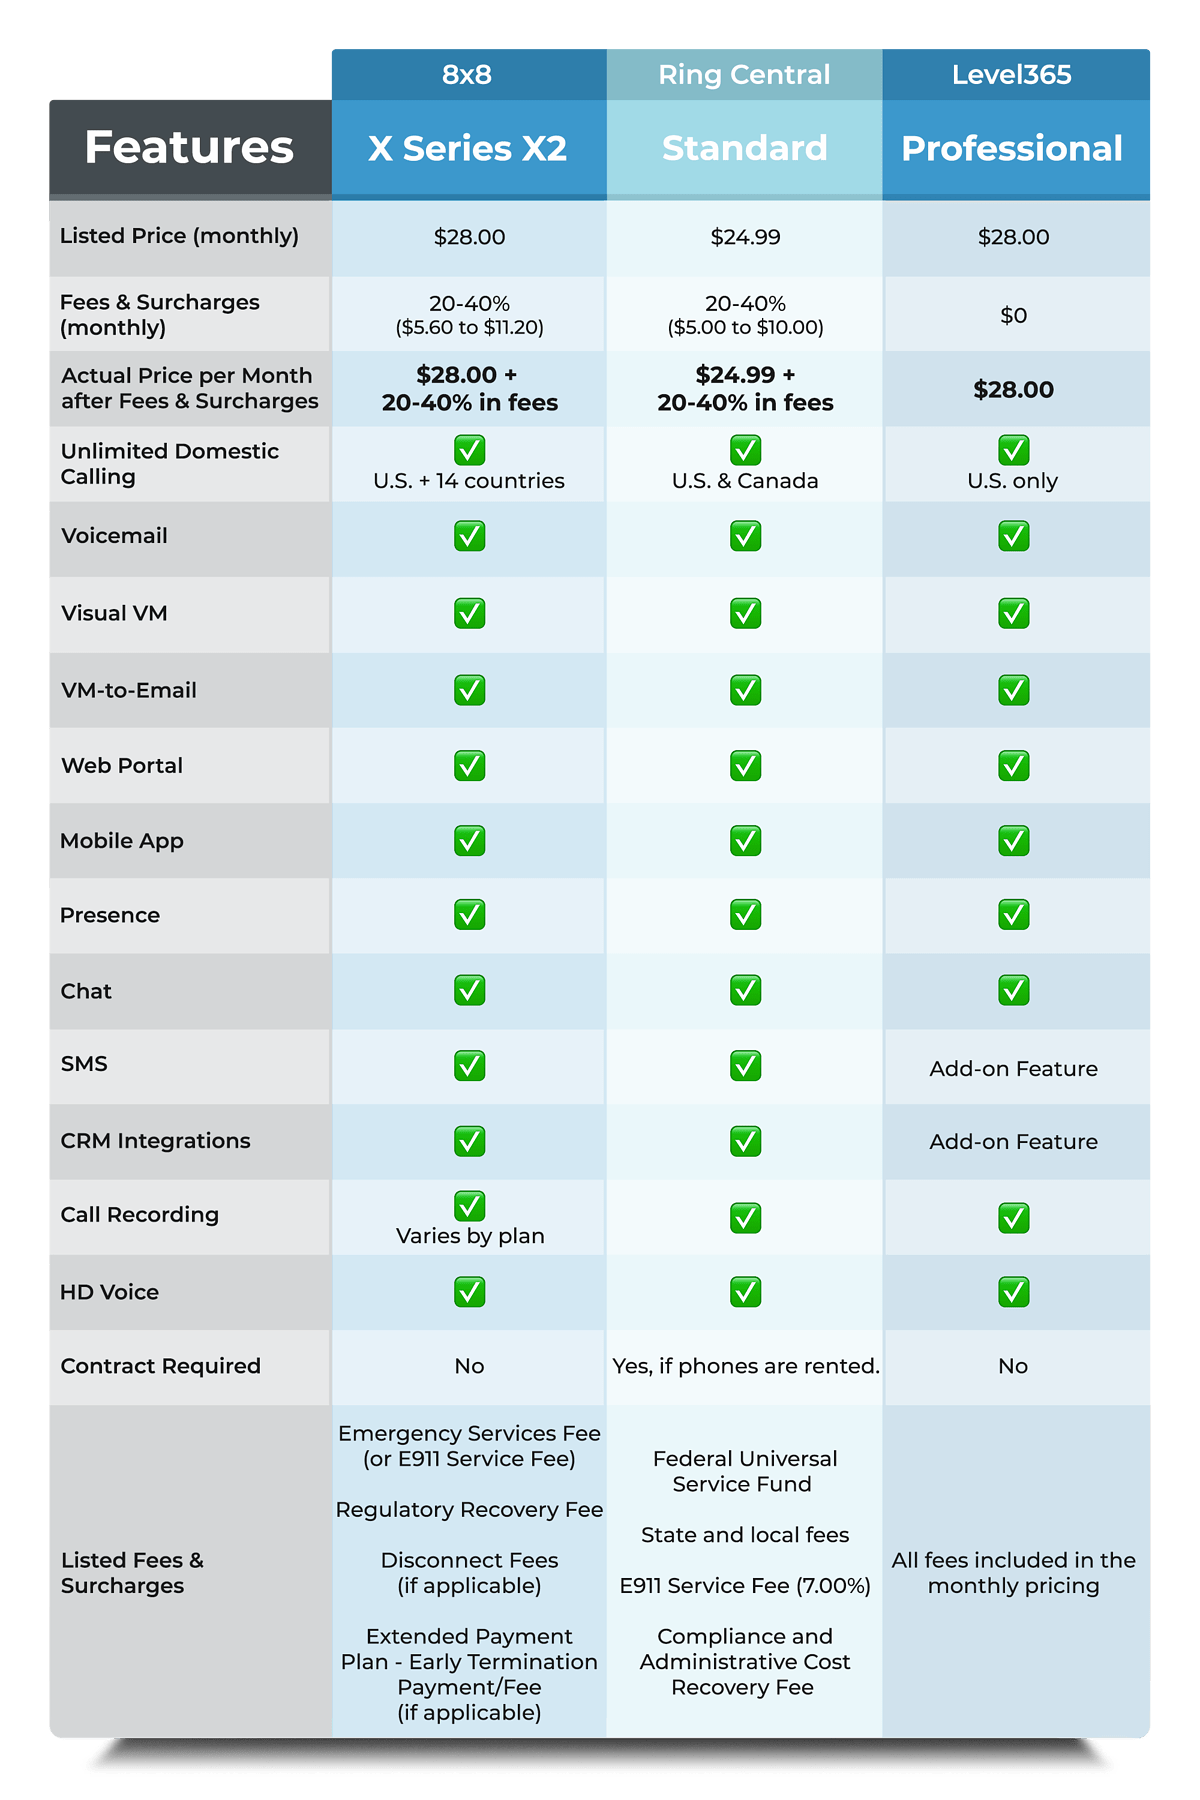 Apples To Apples Comparison Chart